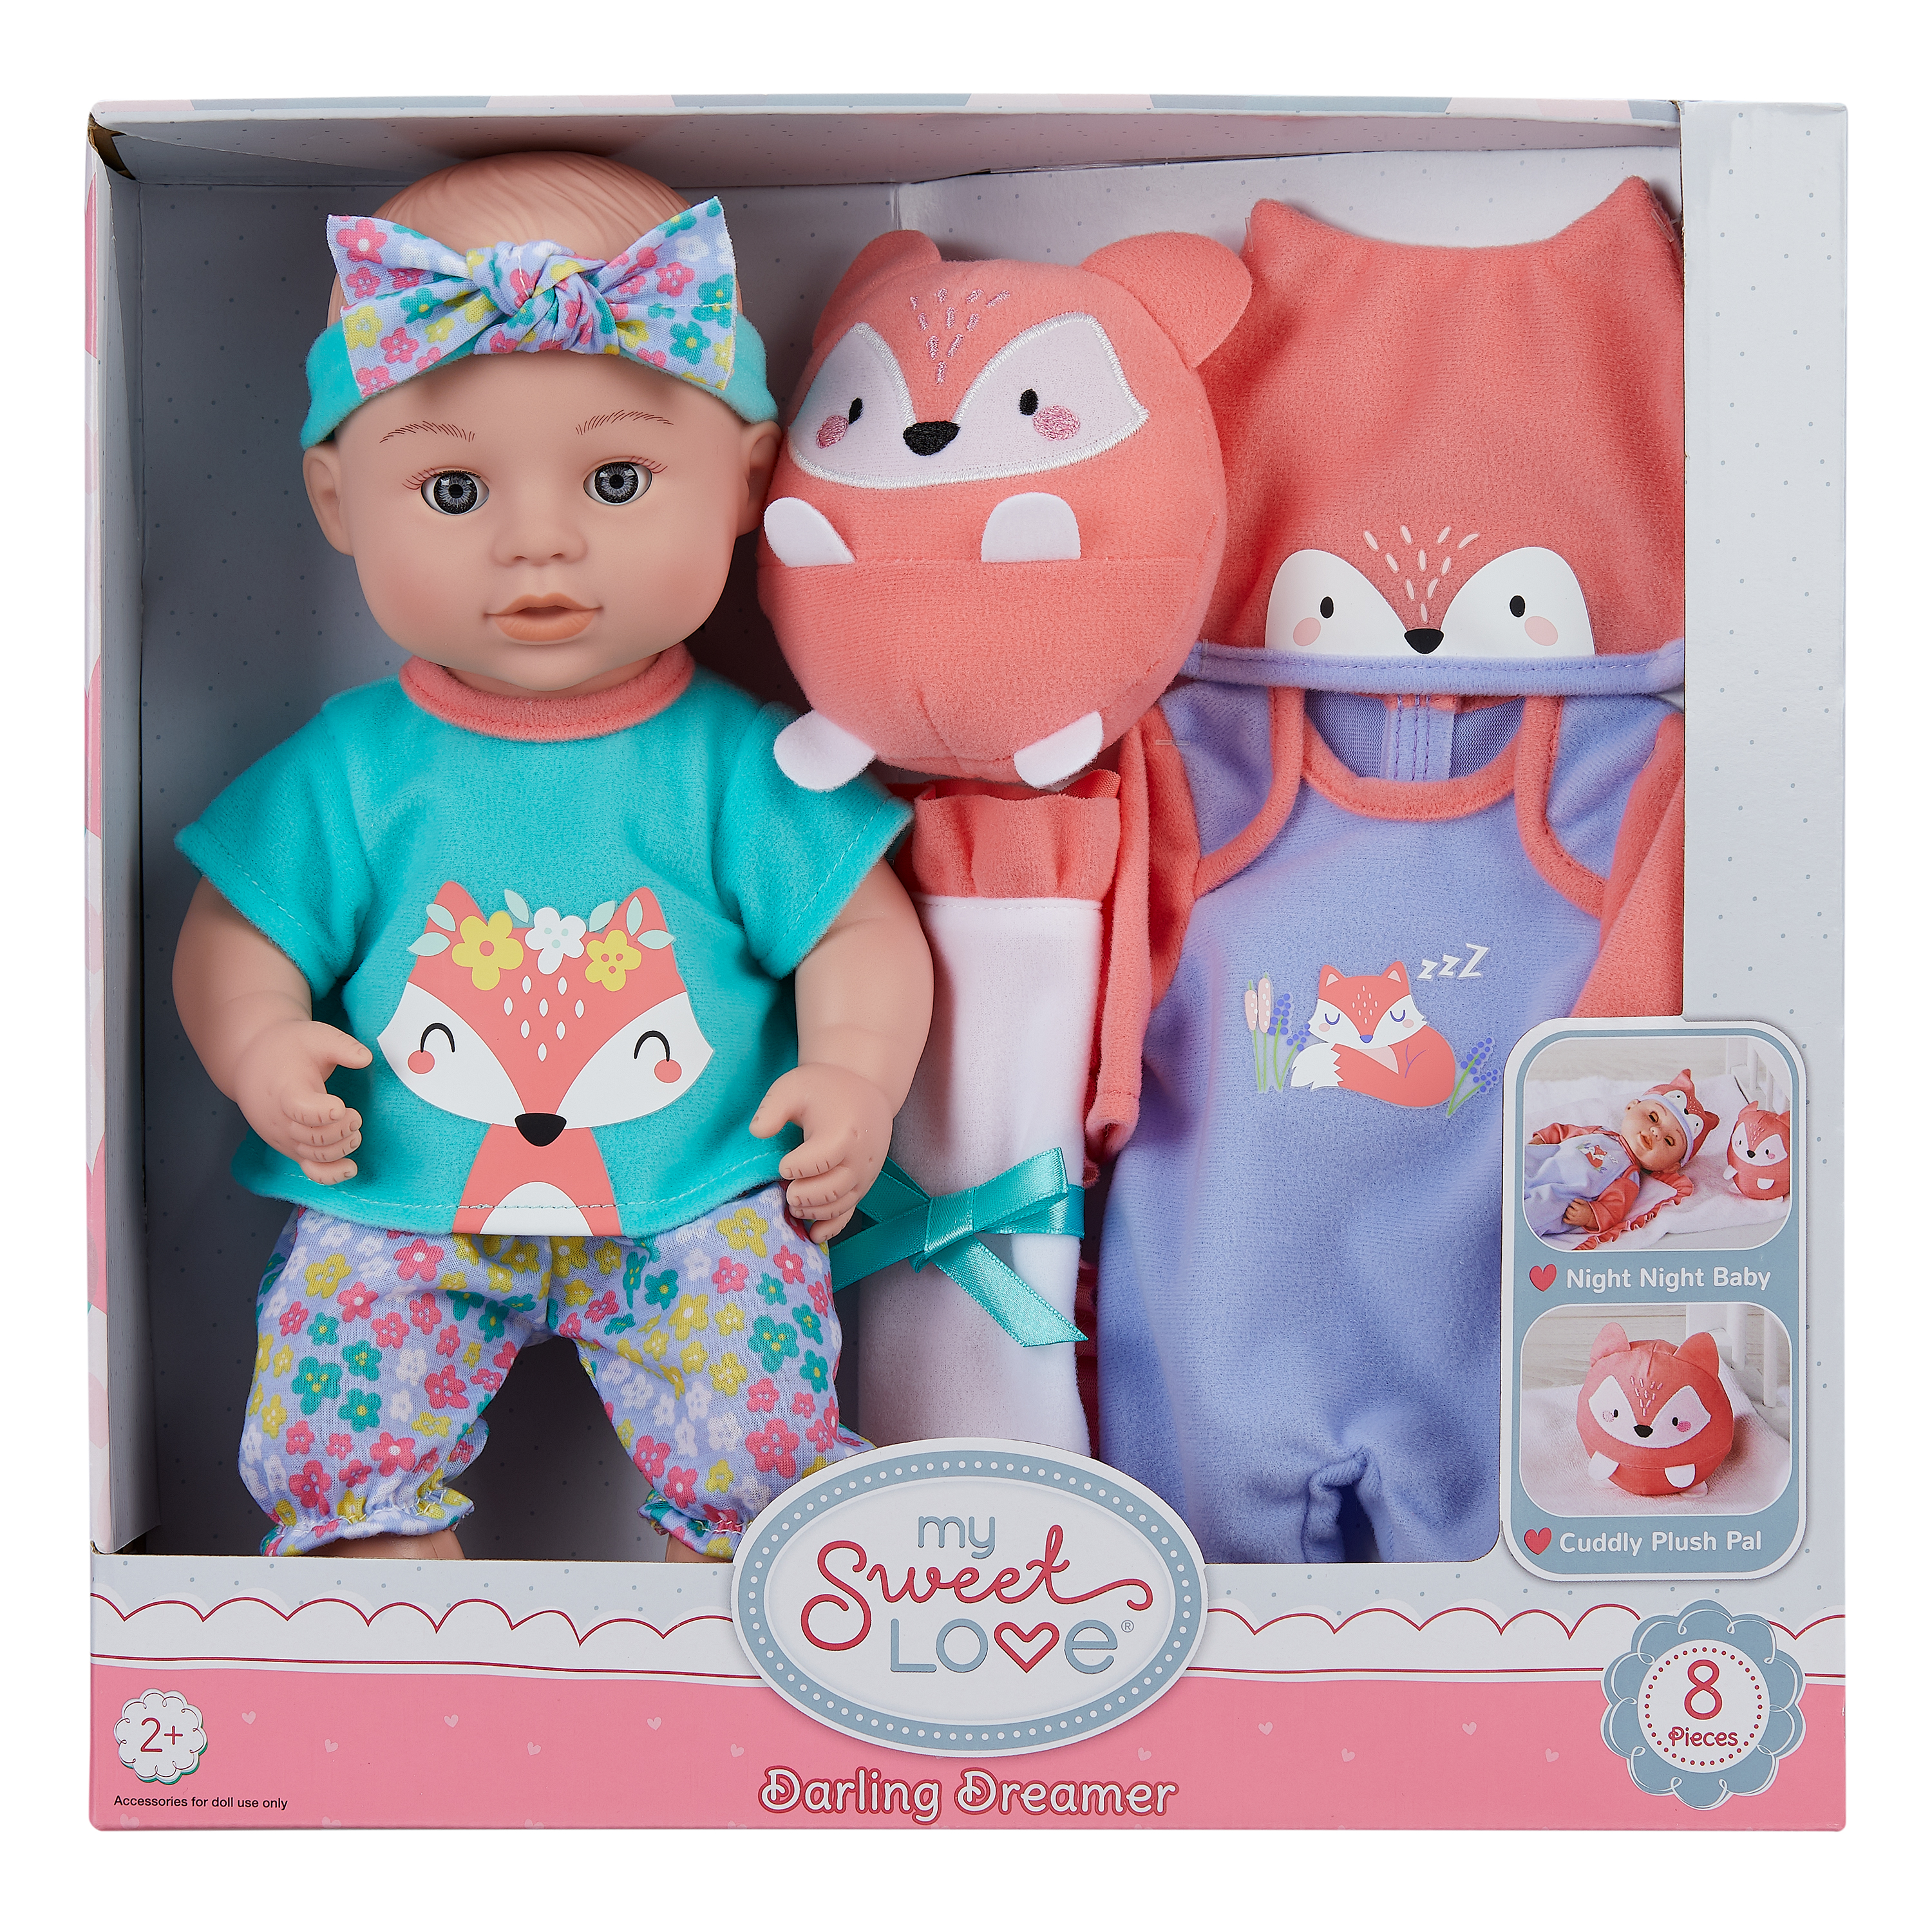 My Sweet Love Bedtime Baby Doll Playset, 8 Pieces Included - image 3 of 4